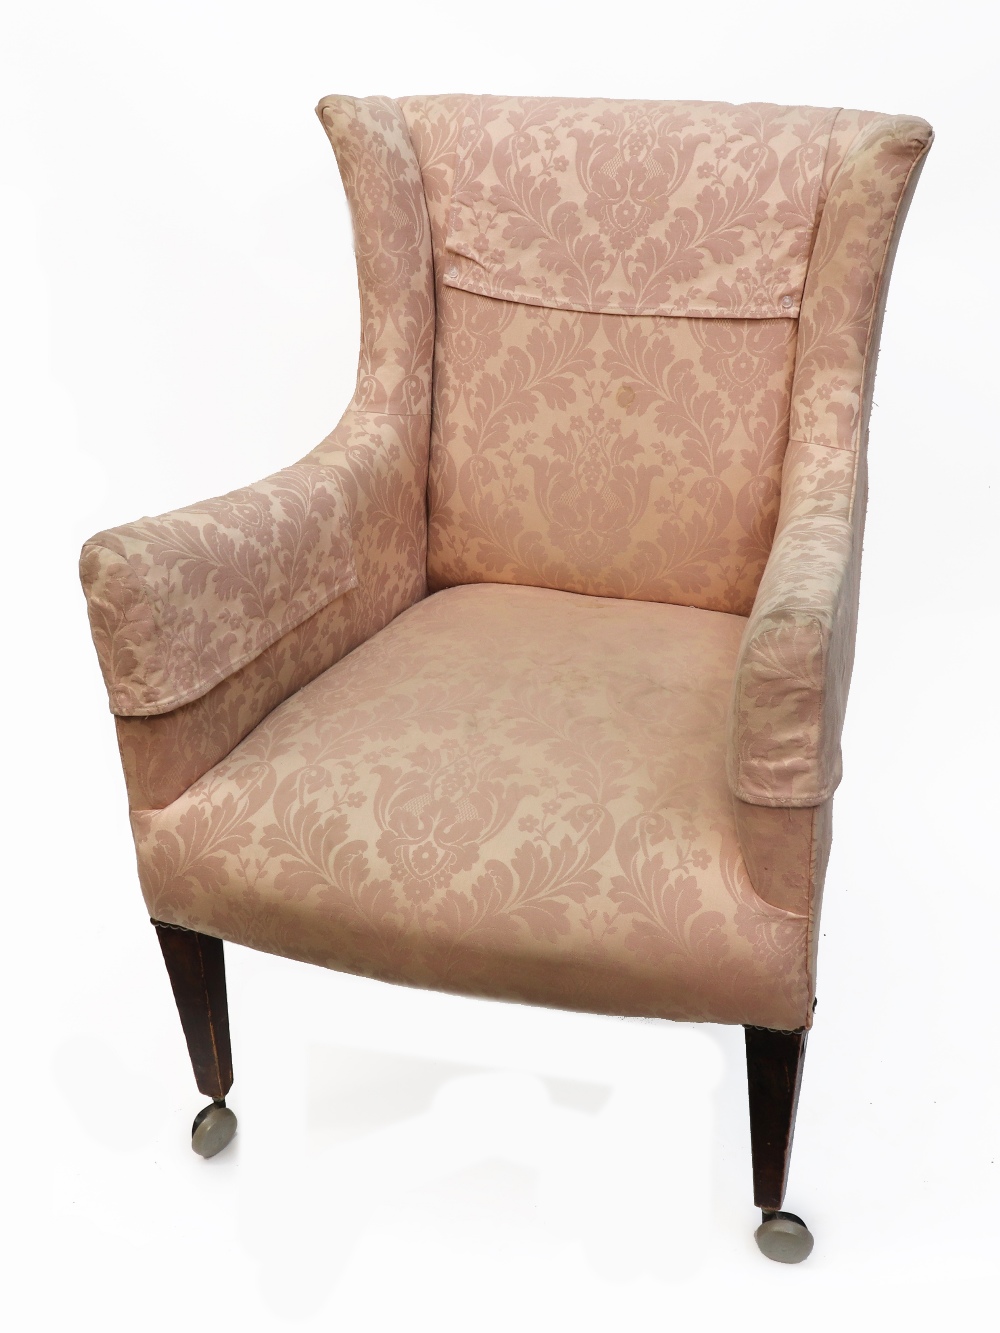 An Edwardian armchair, upholstered in pink, - Image 2 of 2